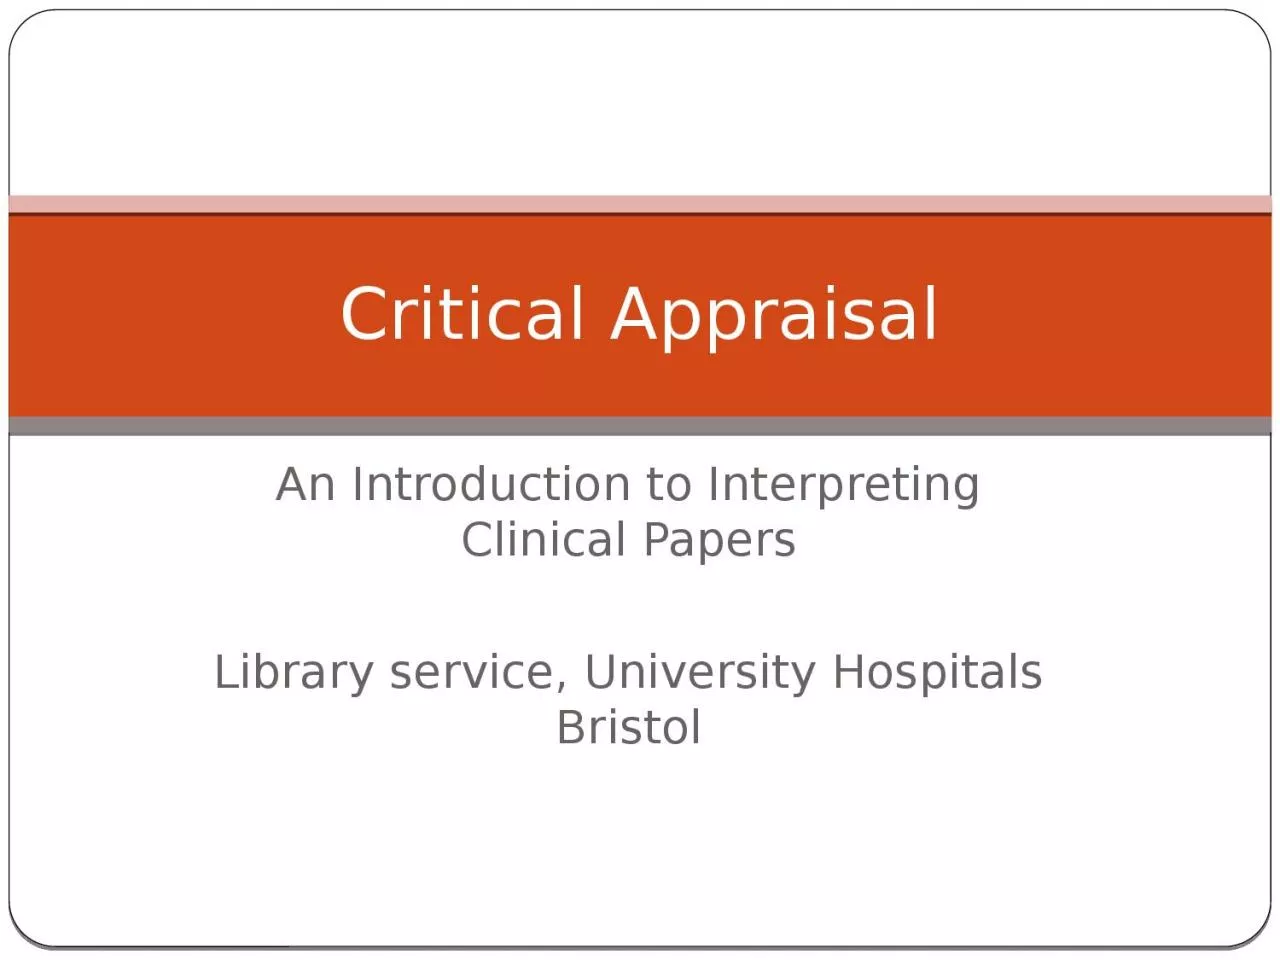 An Introduction to Interpreting Clinical Papers